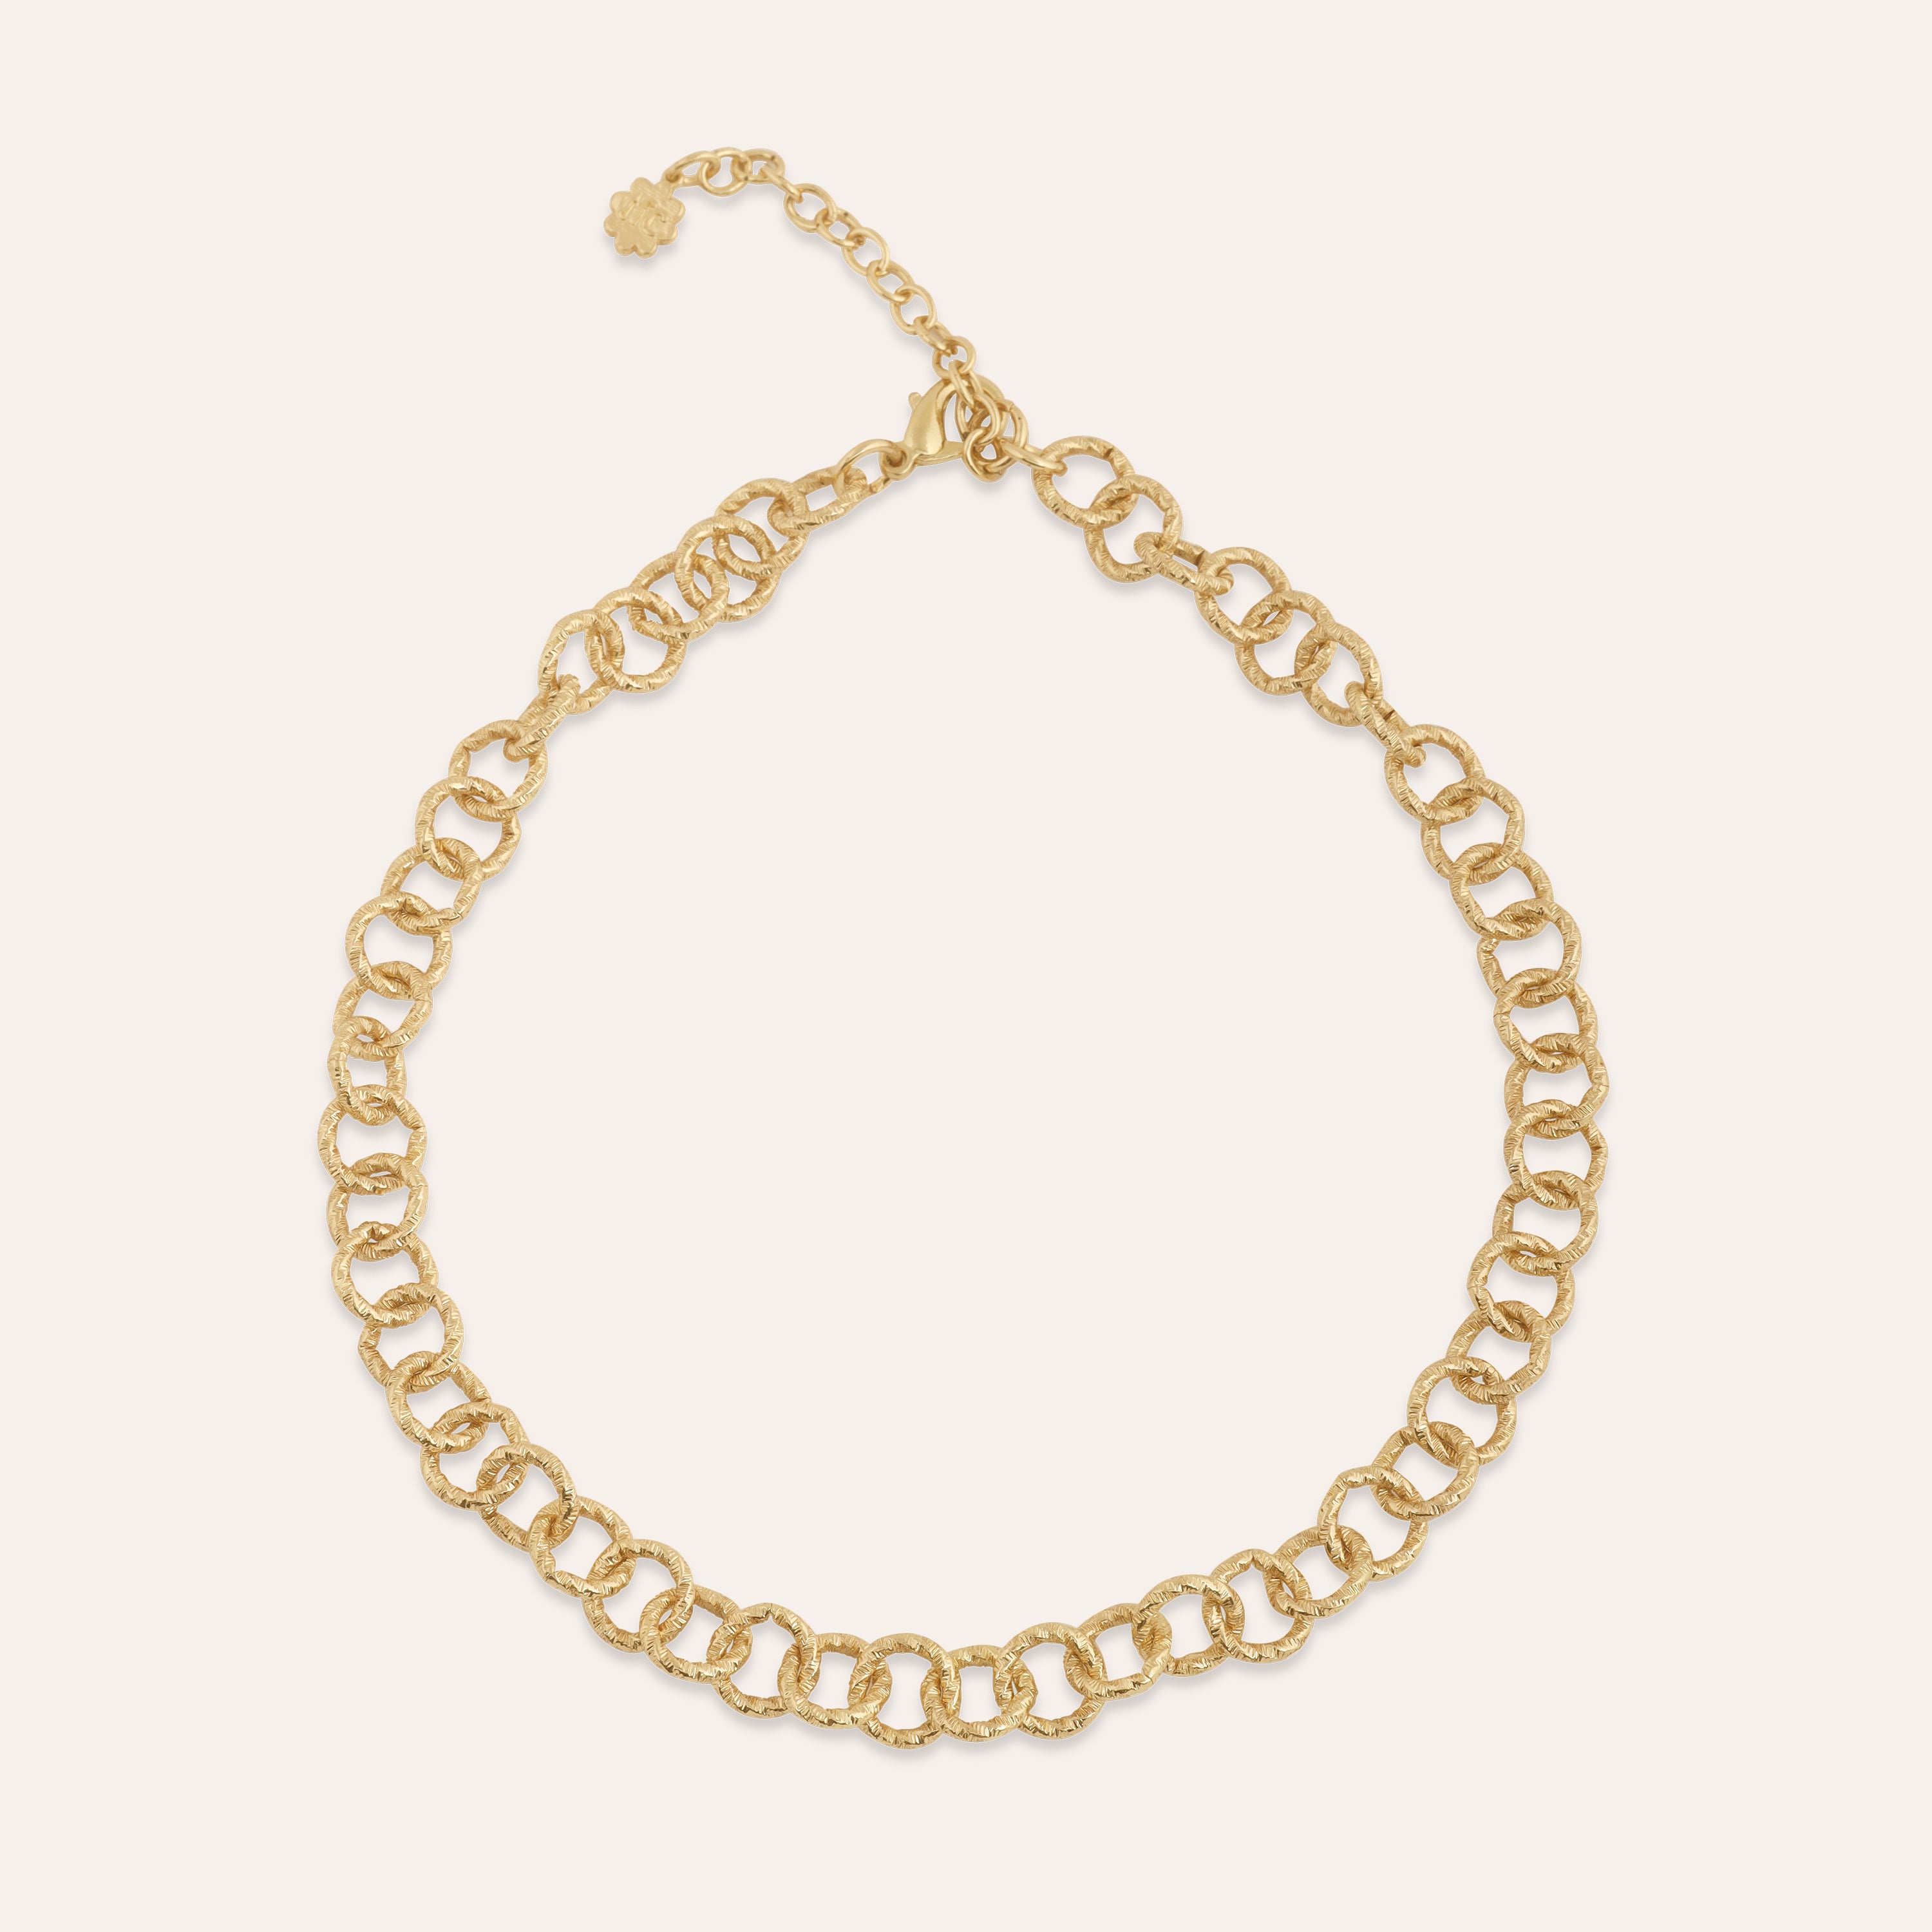 TFC Como Luxury Gold Plated Chain Necklace-Enhance your elegance with our collection of gold-plated necklaces for women. Choose from stunning pendant necklaces, chic choker necklaces, and trendy layered necklaces. Our sleek and dainty designs are both affordable and anti-tarnish, ensuring lasting beauty. Enjoy the cheapest fashion jewellery, lightweight and stylish- only at The Fun Company